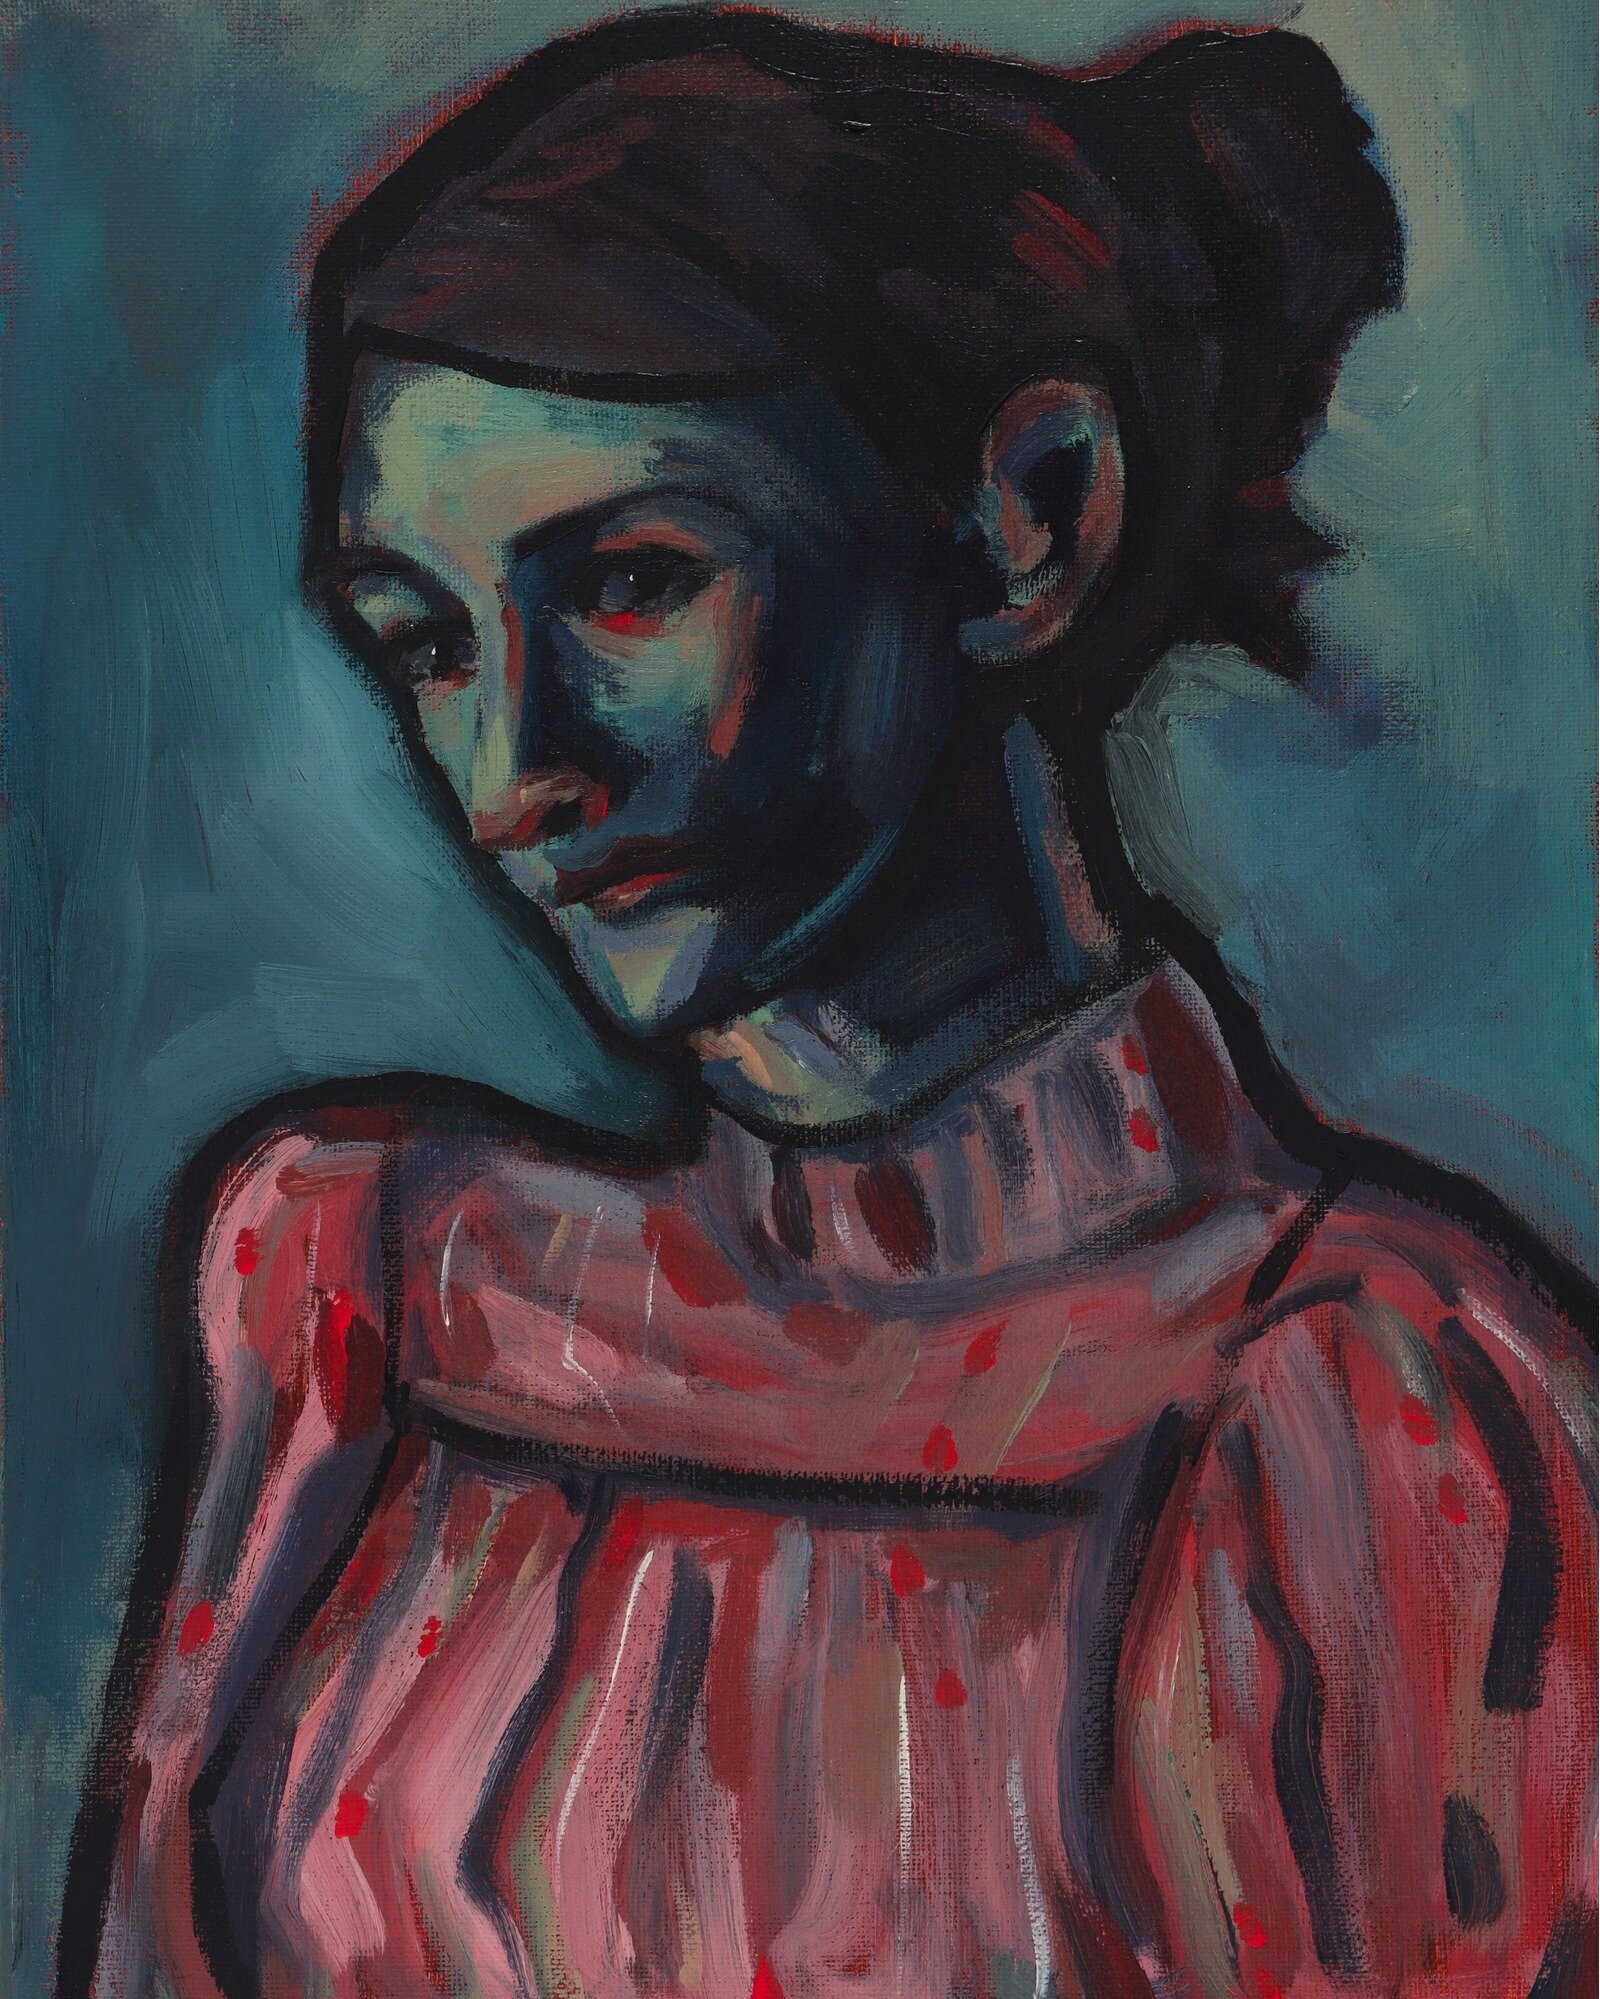 &quot;Woman in Sweater&quot;, 2023 Acrylic on Canvas. Now on display and for sale at @evolvdesigncollective. I departed from this kind of expressionist style with thick, blocked in strokes and simplified forms for a while. I did many simplified, flat